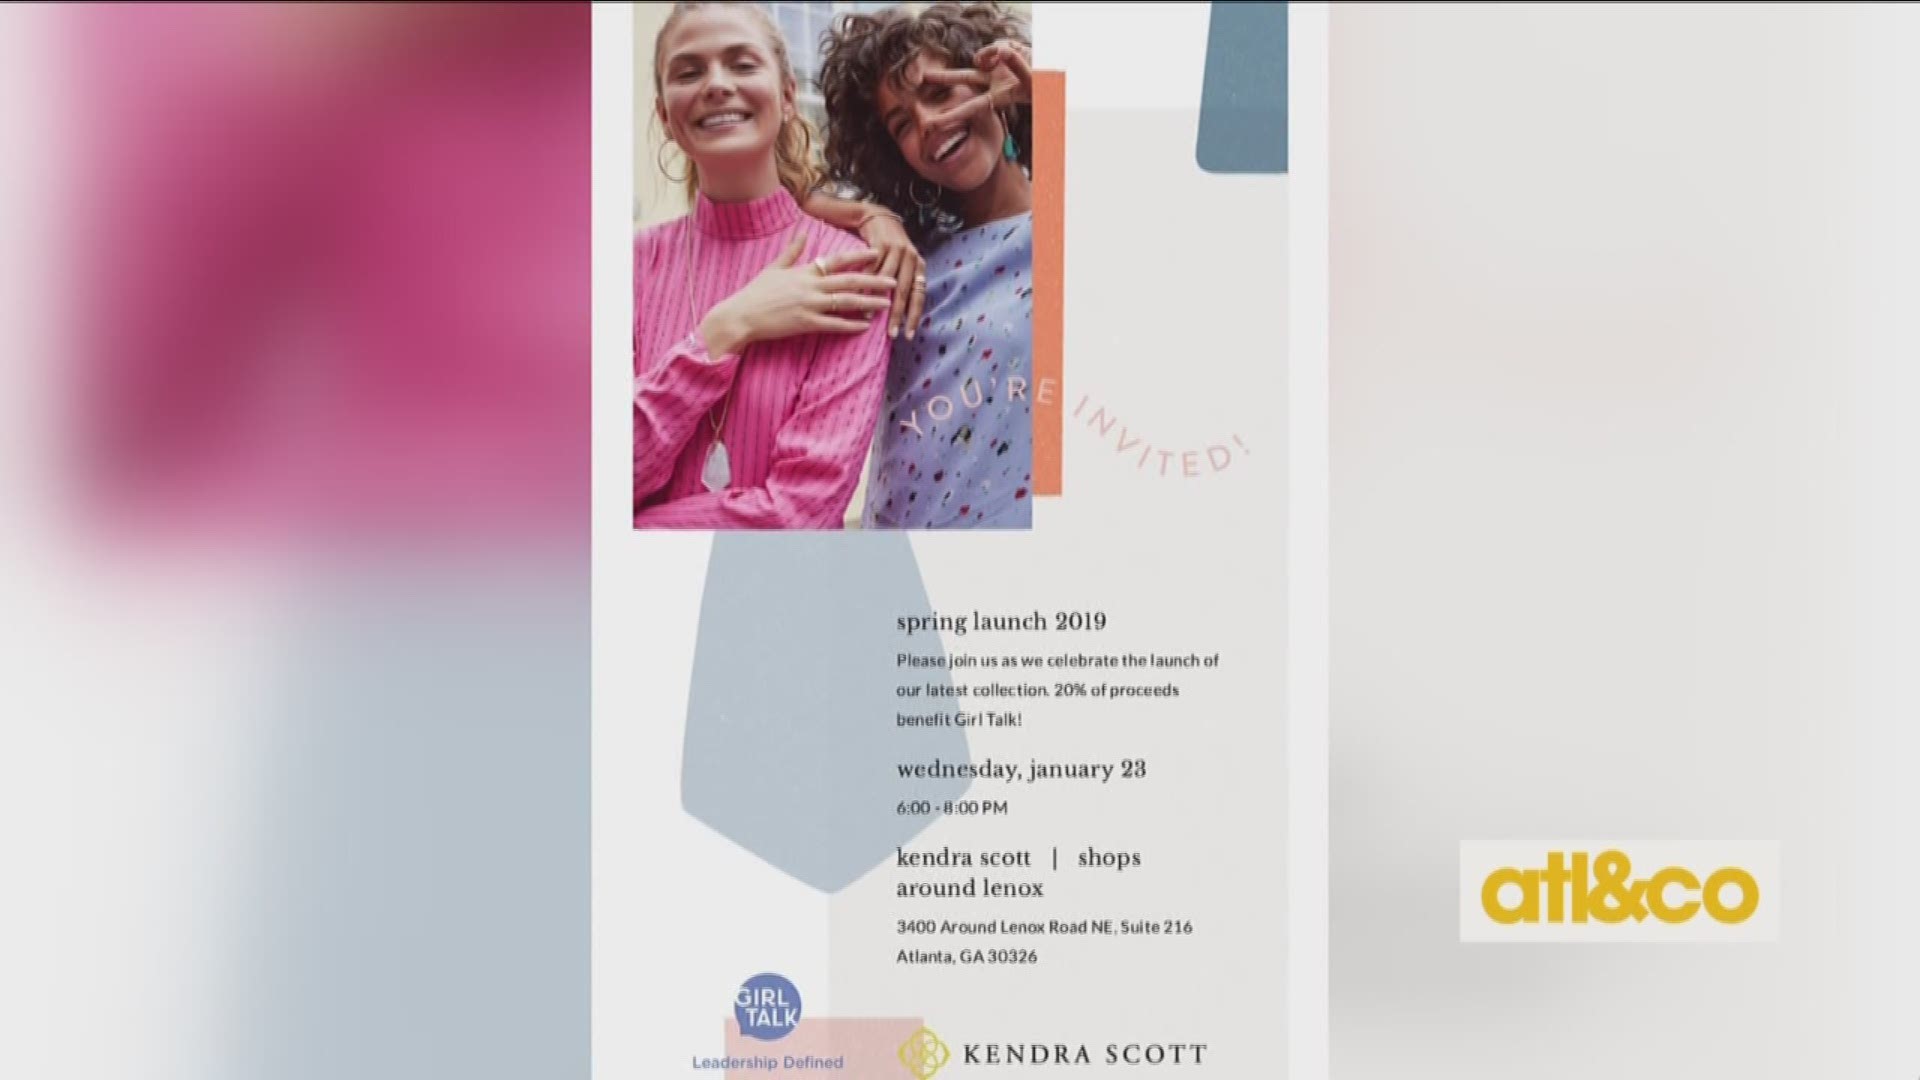 Kendra Scott partners with Girl Talk for National Mentoring Month! Myra Sky shares their upcoming event and others on Community Connection, brought to you by Woodstock Furniture & Mattress Outlet.